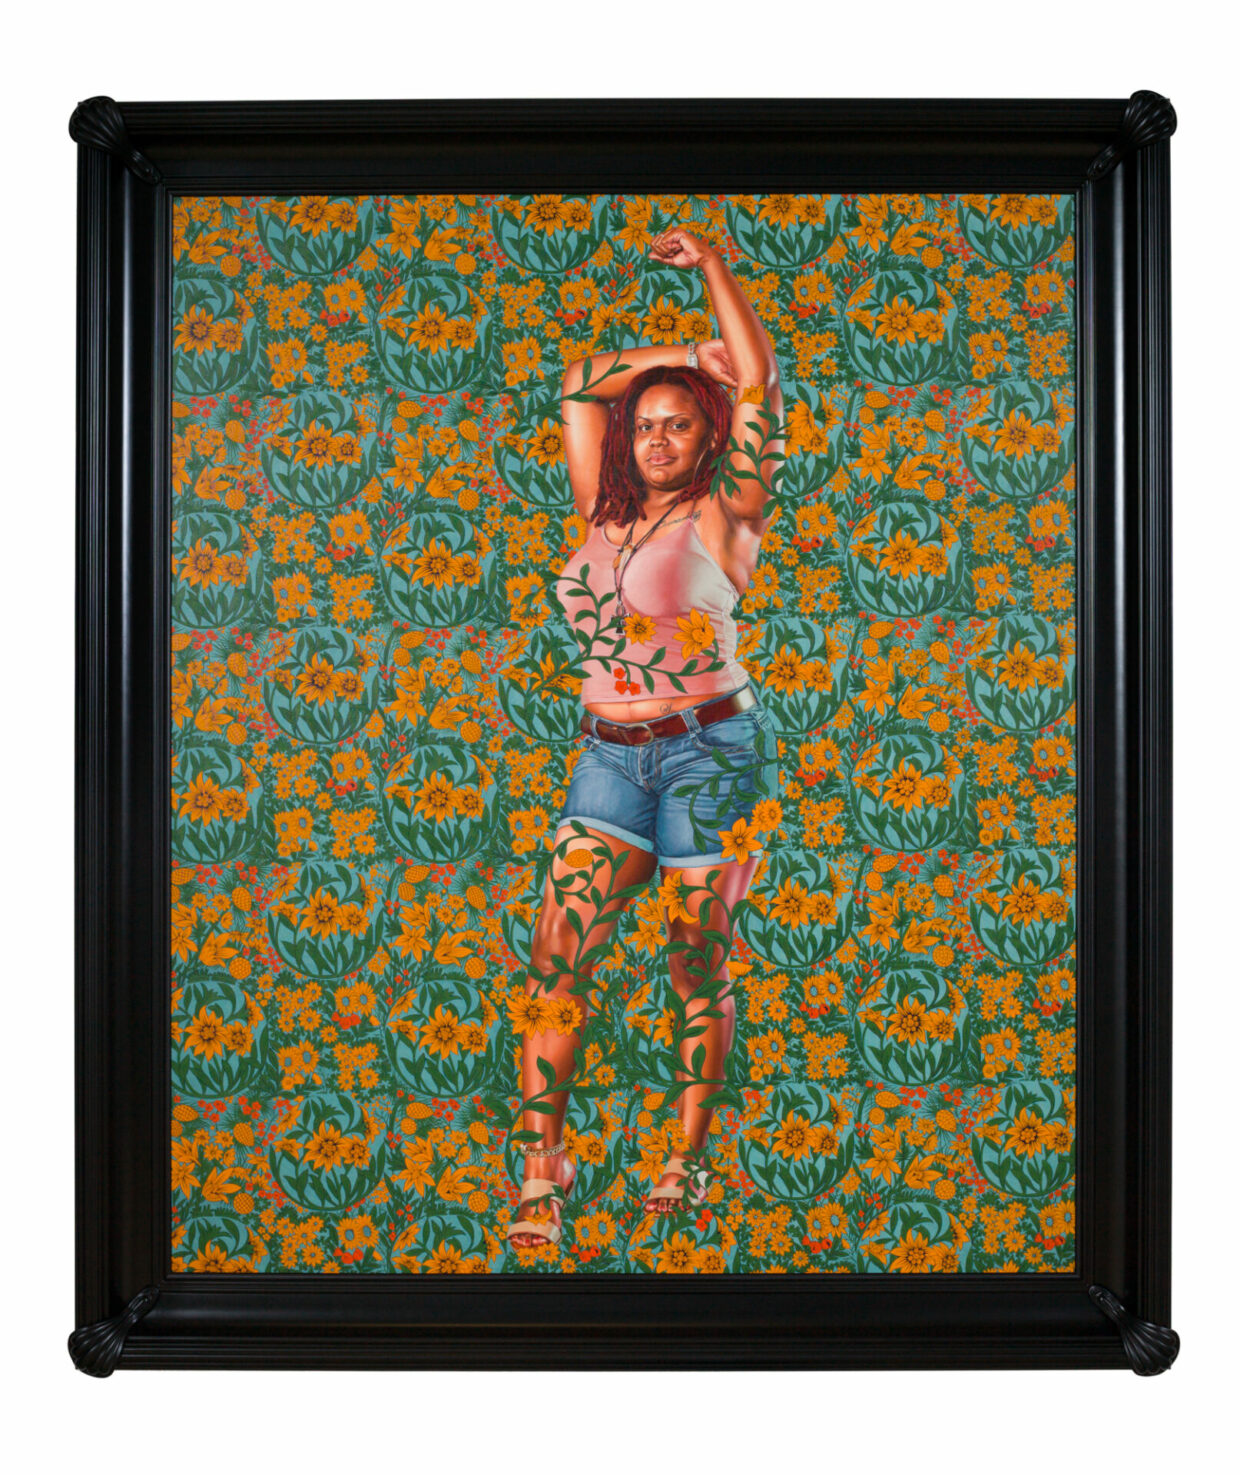 Kehinde Wiley: ‘When I first started painting black women, it was a return home’ | 6